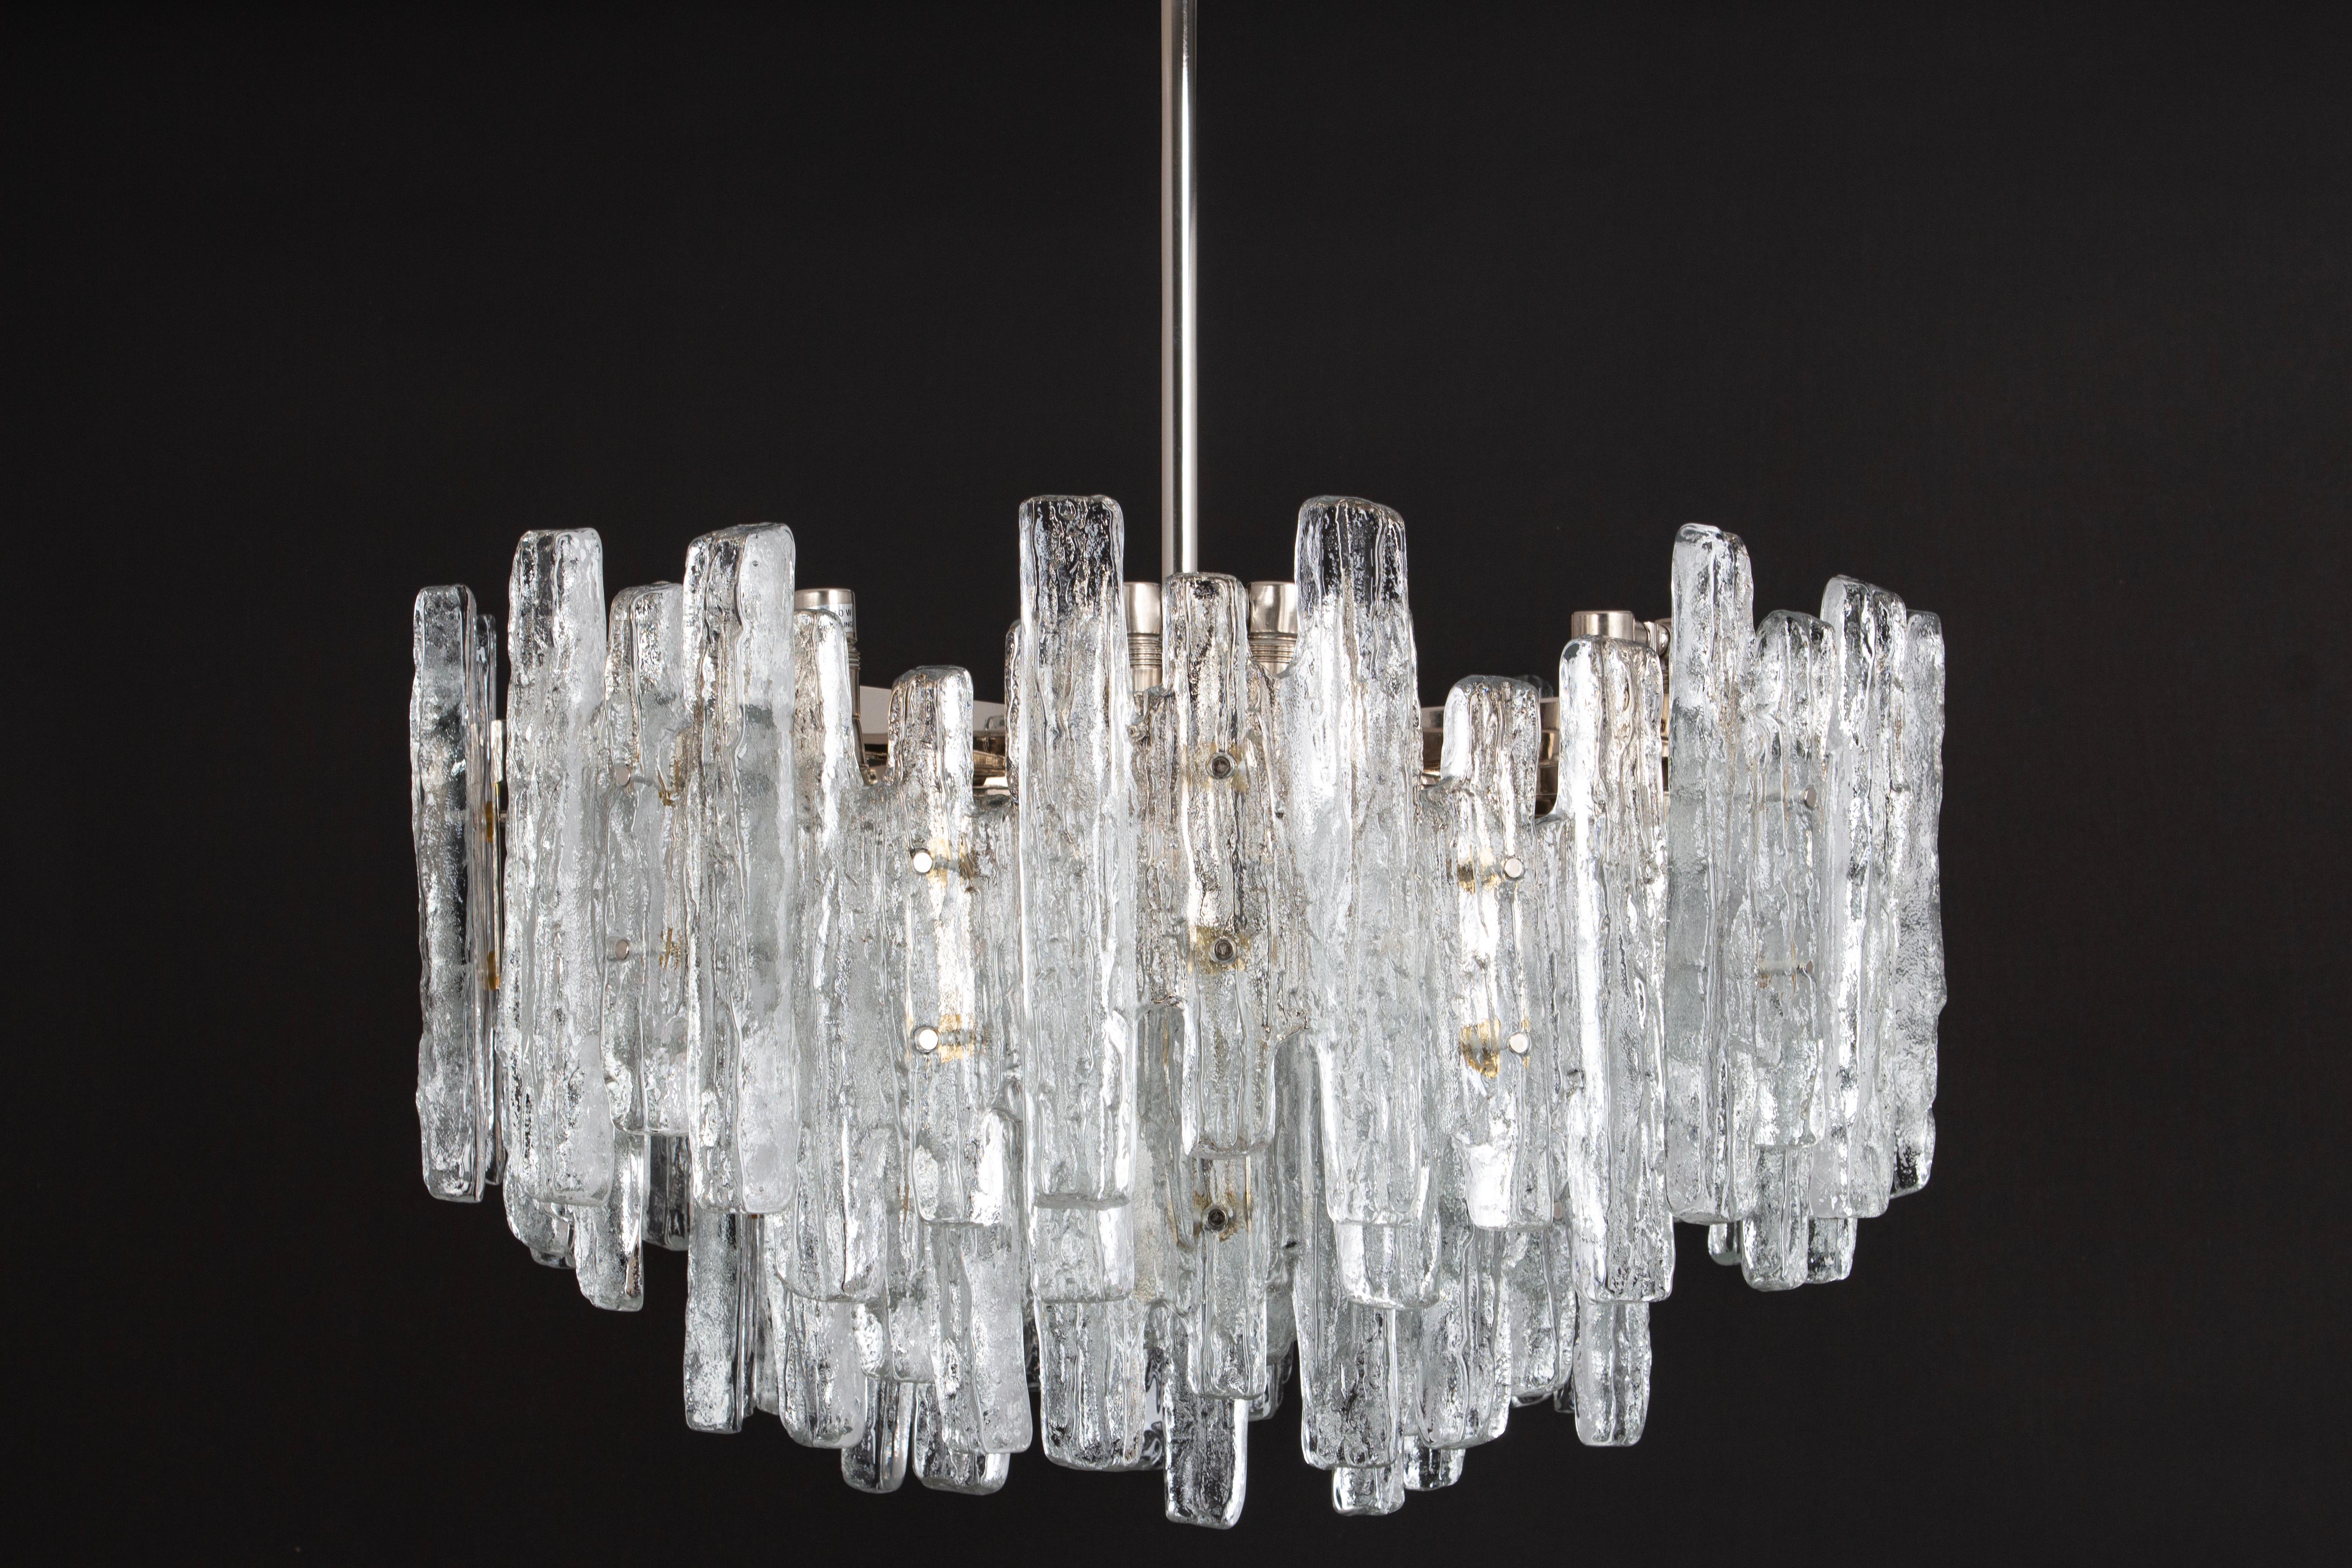 Large Rare Murano Ice Glass Chandelier by Kalmar, Austria, 1960s For Sale 6